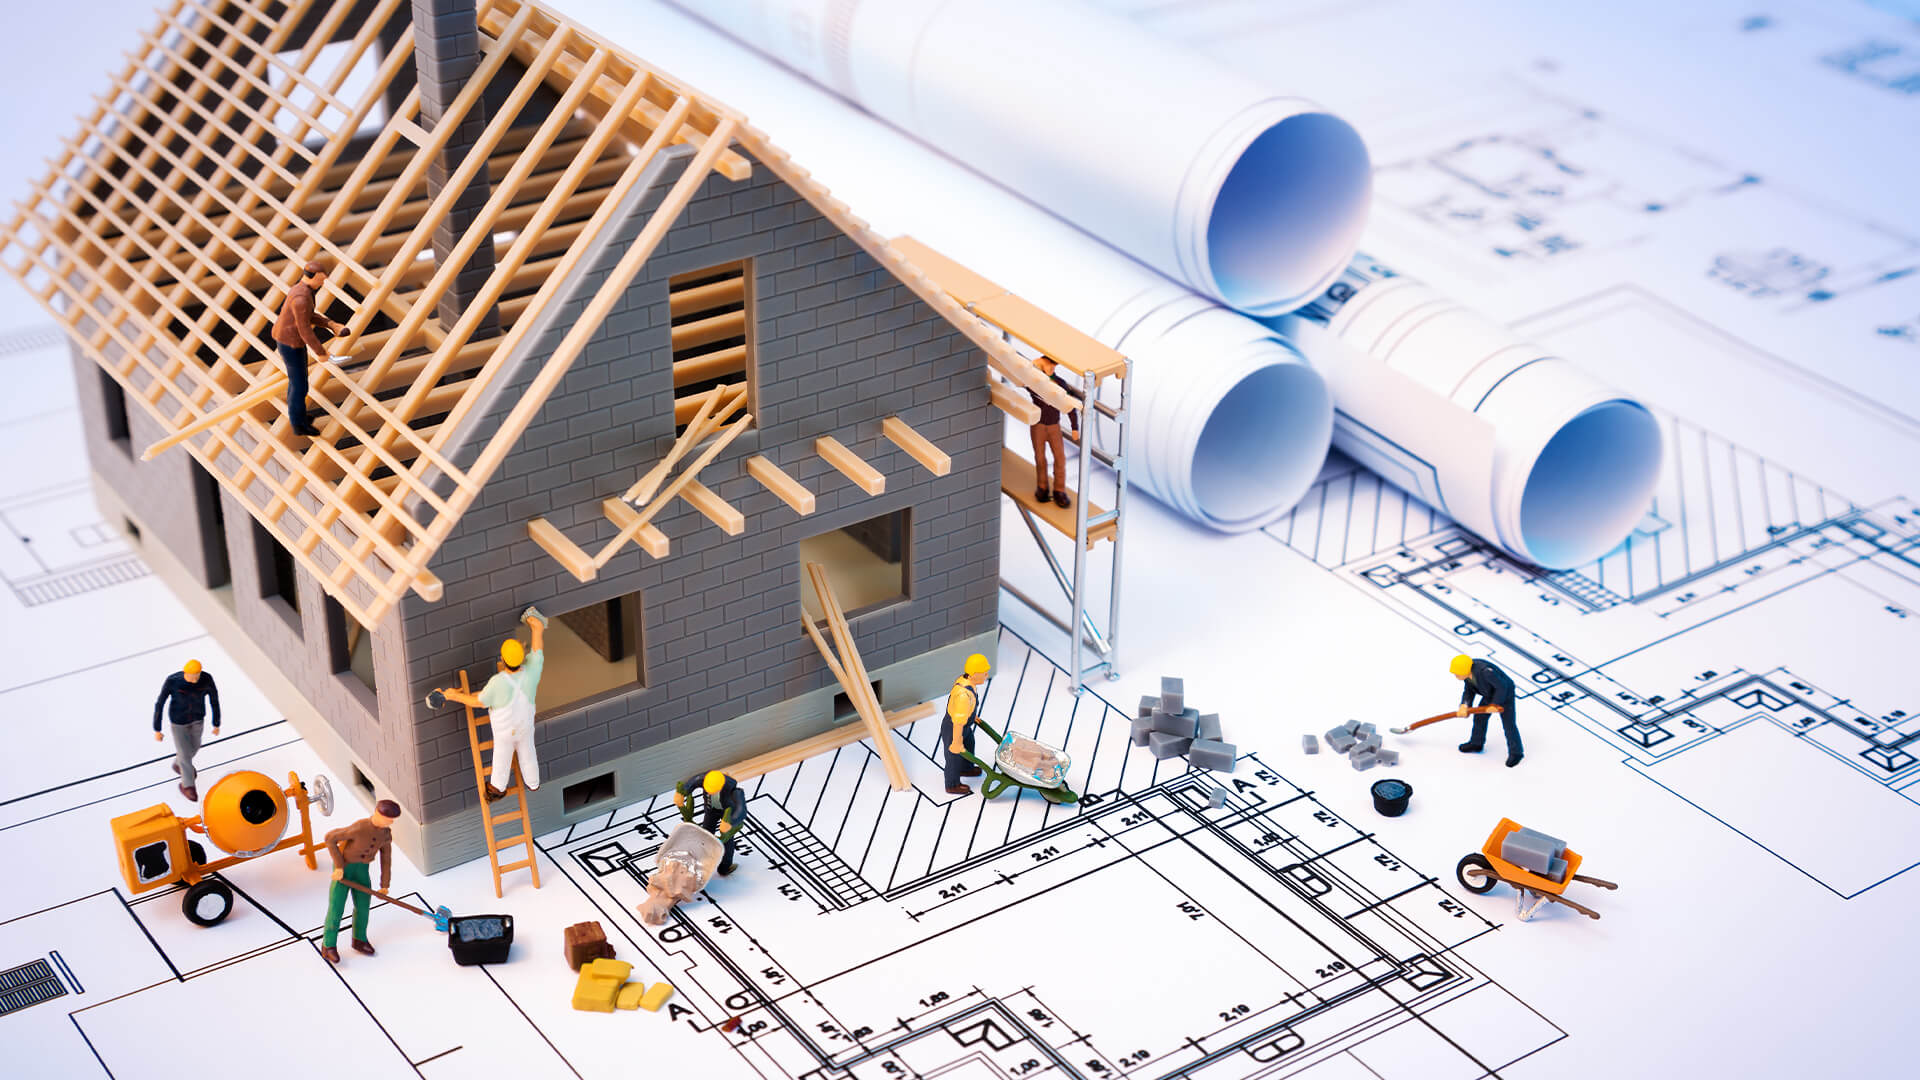 A guide to construction safety for homebuilders